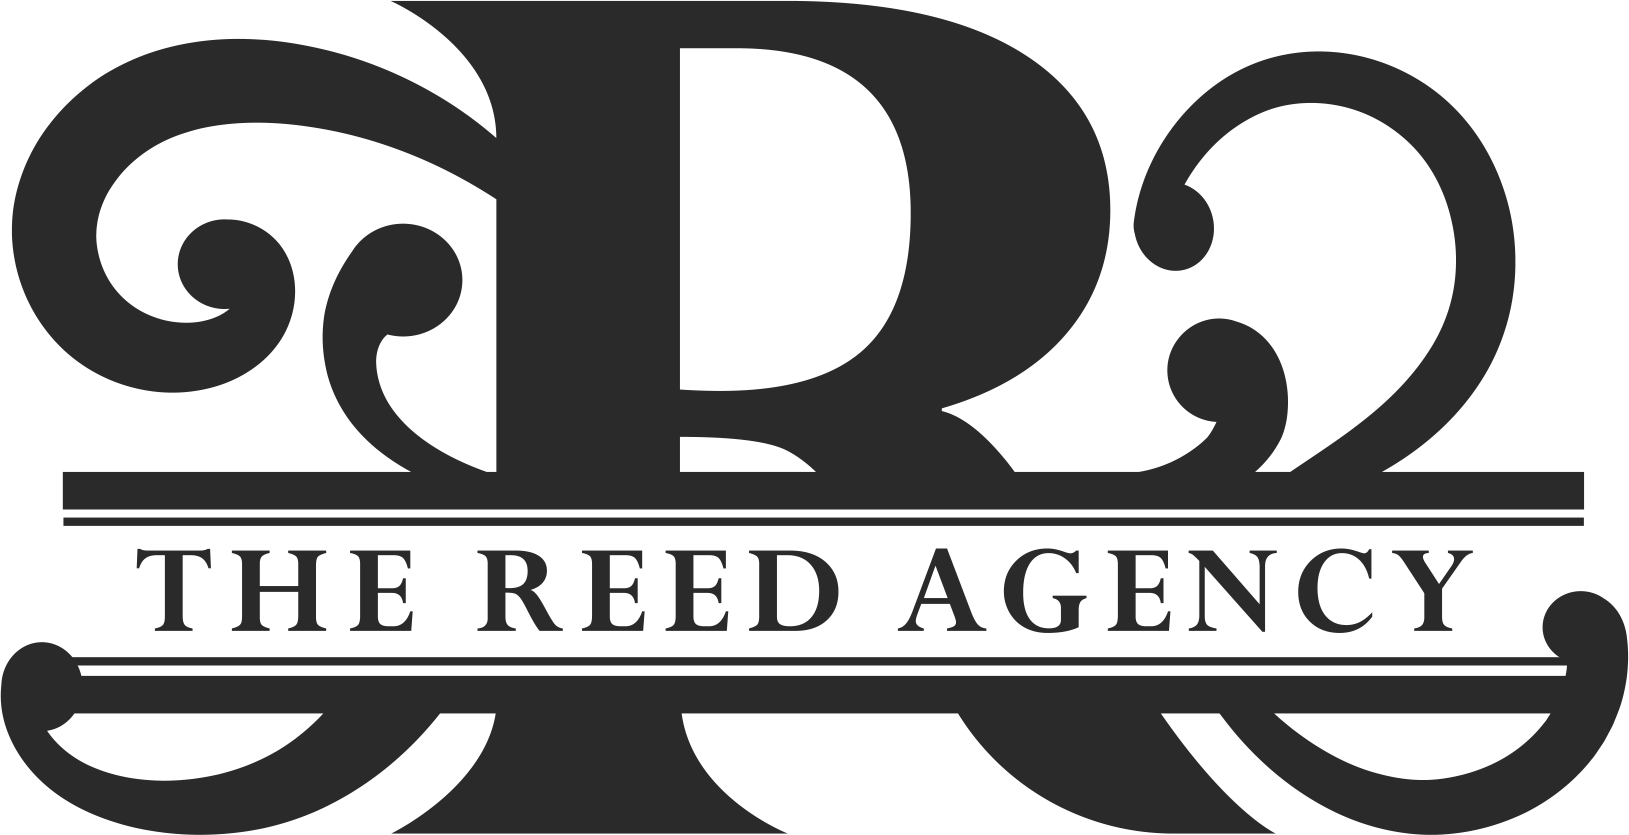 Logo for The Reed Agency located in Canon City, CO